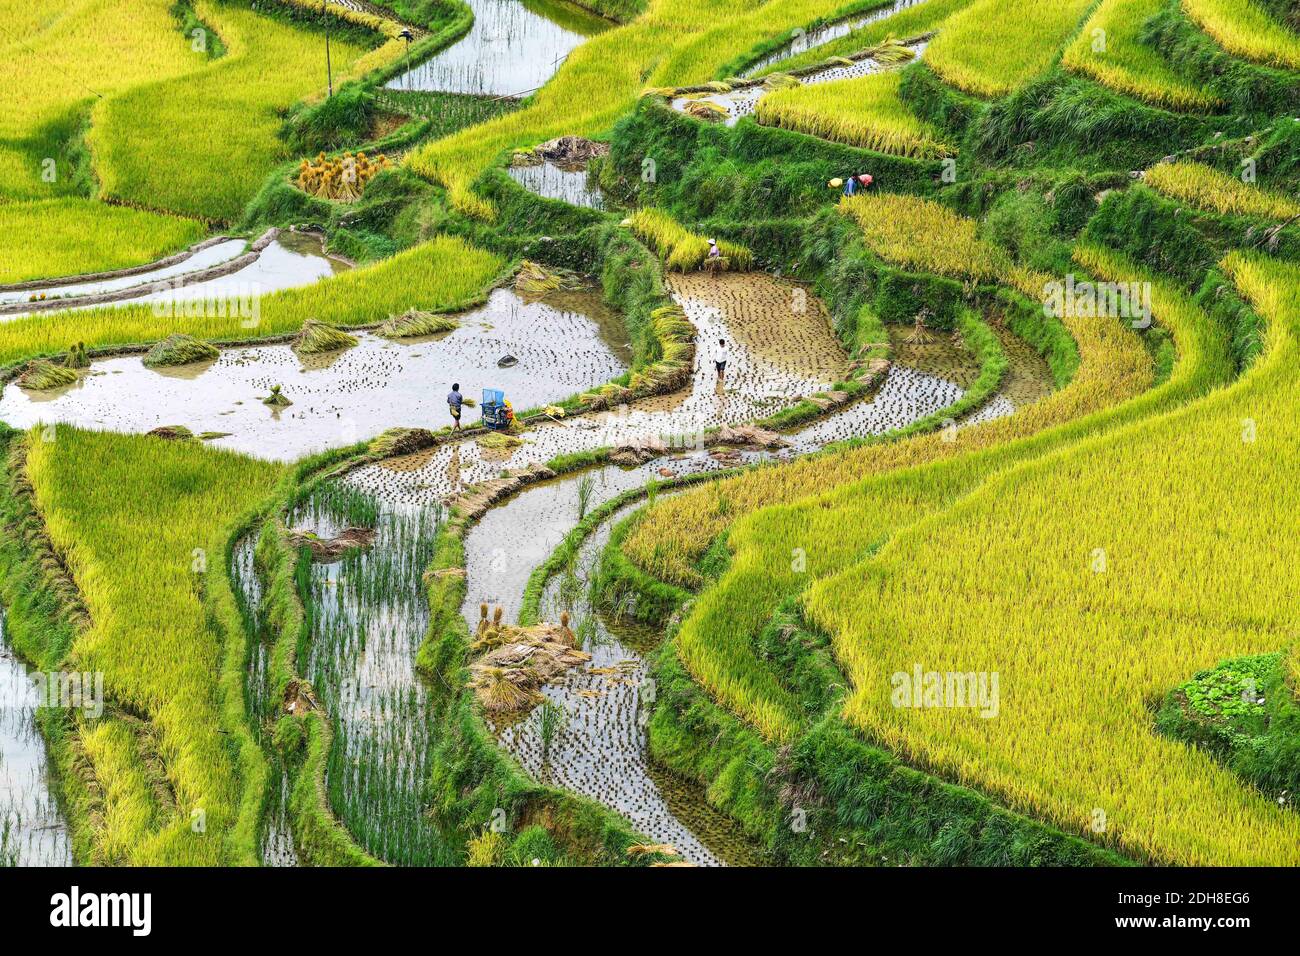 (201210) -- BEIJING, Dec. 10, 2020 (Xinhua) -- Farmers harvest rice at Dangniu Village, Jiabang Township, Congjiang County of southwest China's Guizhou Province, Sept. 19, 2020.  China's grain output reached nearly 670 billion kg in 2020, up 5.65 billion kg, or 0.9 percent, from last year, the National Bureau of Statistics (NBS) said on Thursday.  This marks the sixth consecutive year that the country's total grain production has exceeded 650 billion kg. The bumper harvest comes despite disrupted farming as a result of the COVID-19 epidemic, which has been held in check thanks to efforts to en Stock Photo